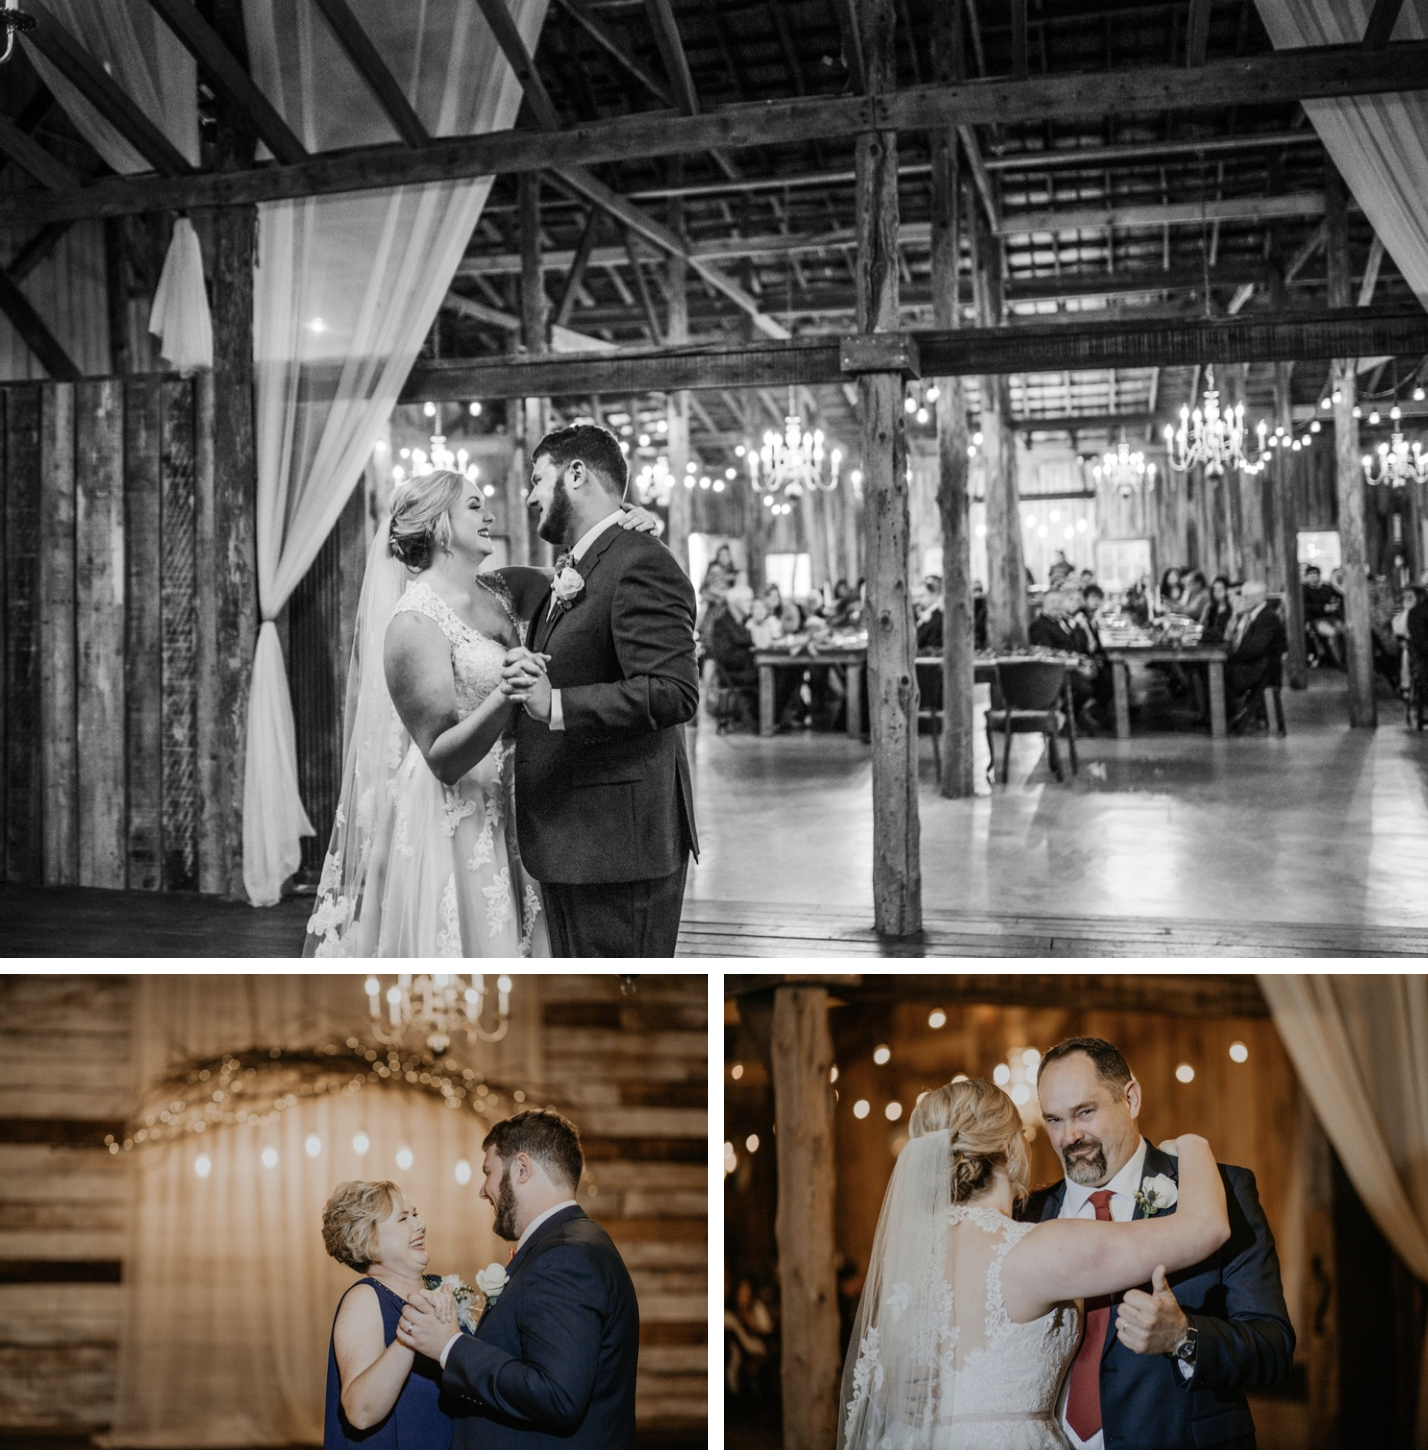 The bride and groom's first dance at meadow Hill Farm.